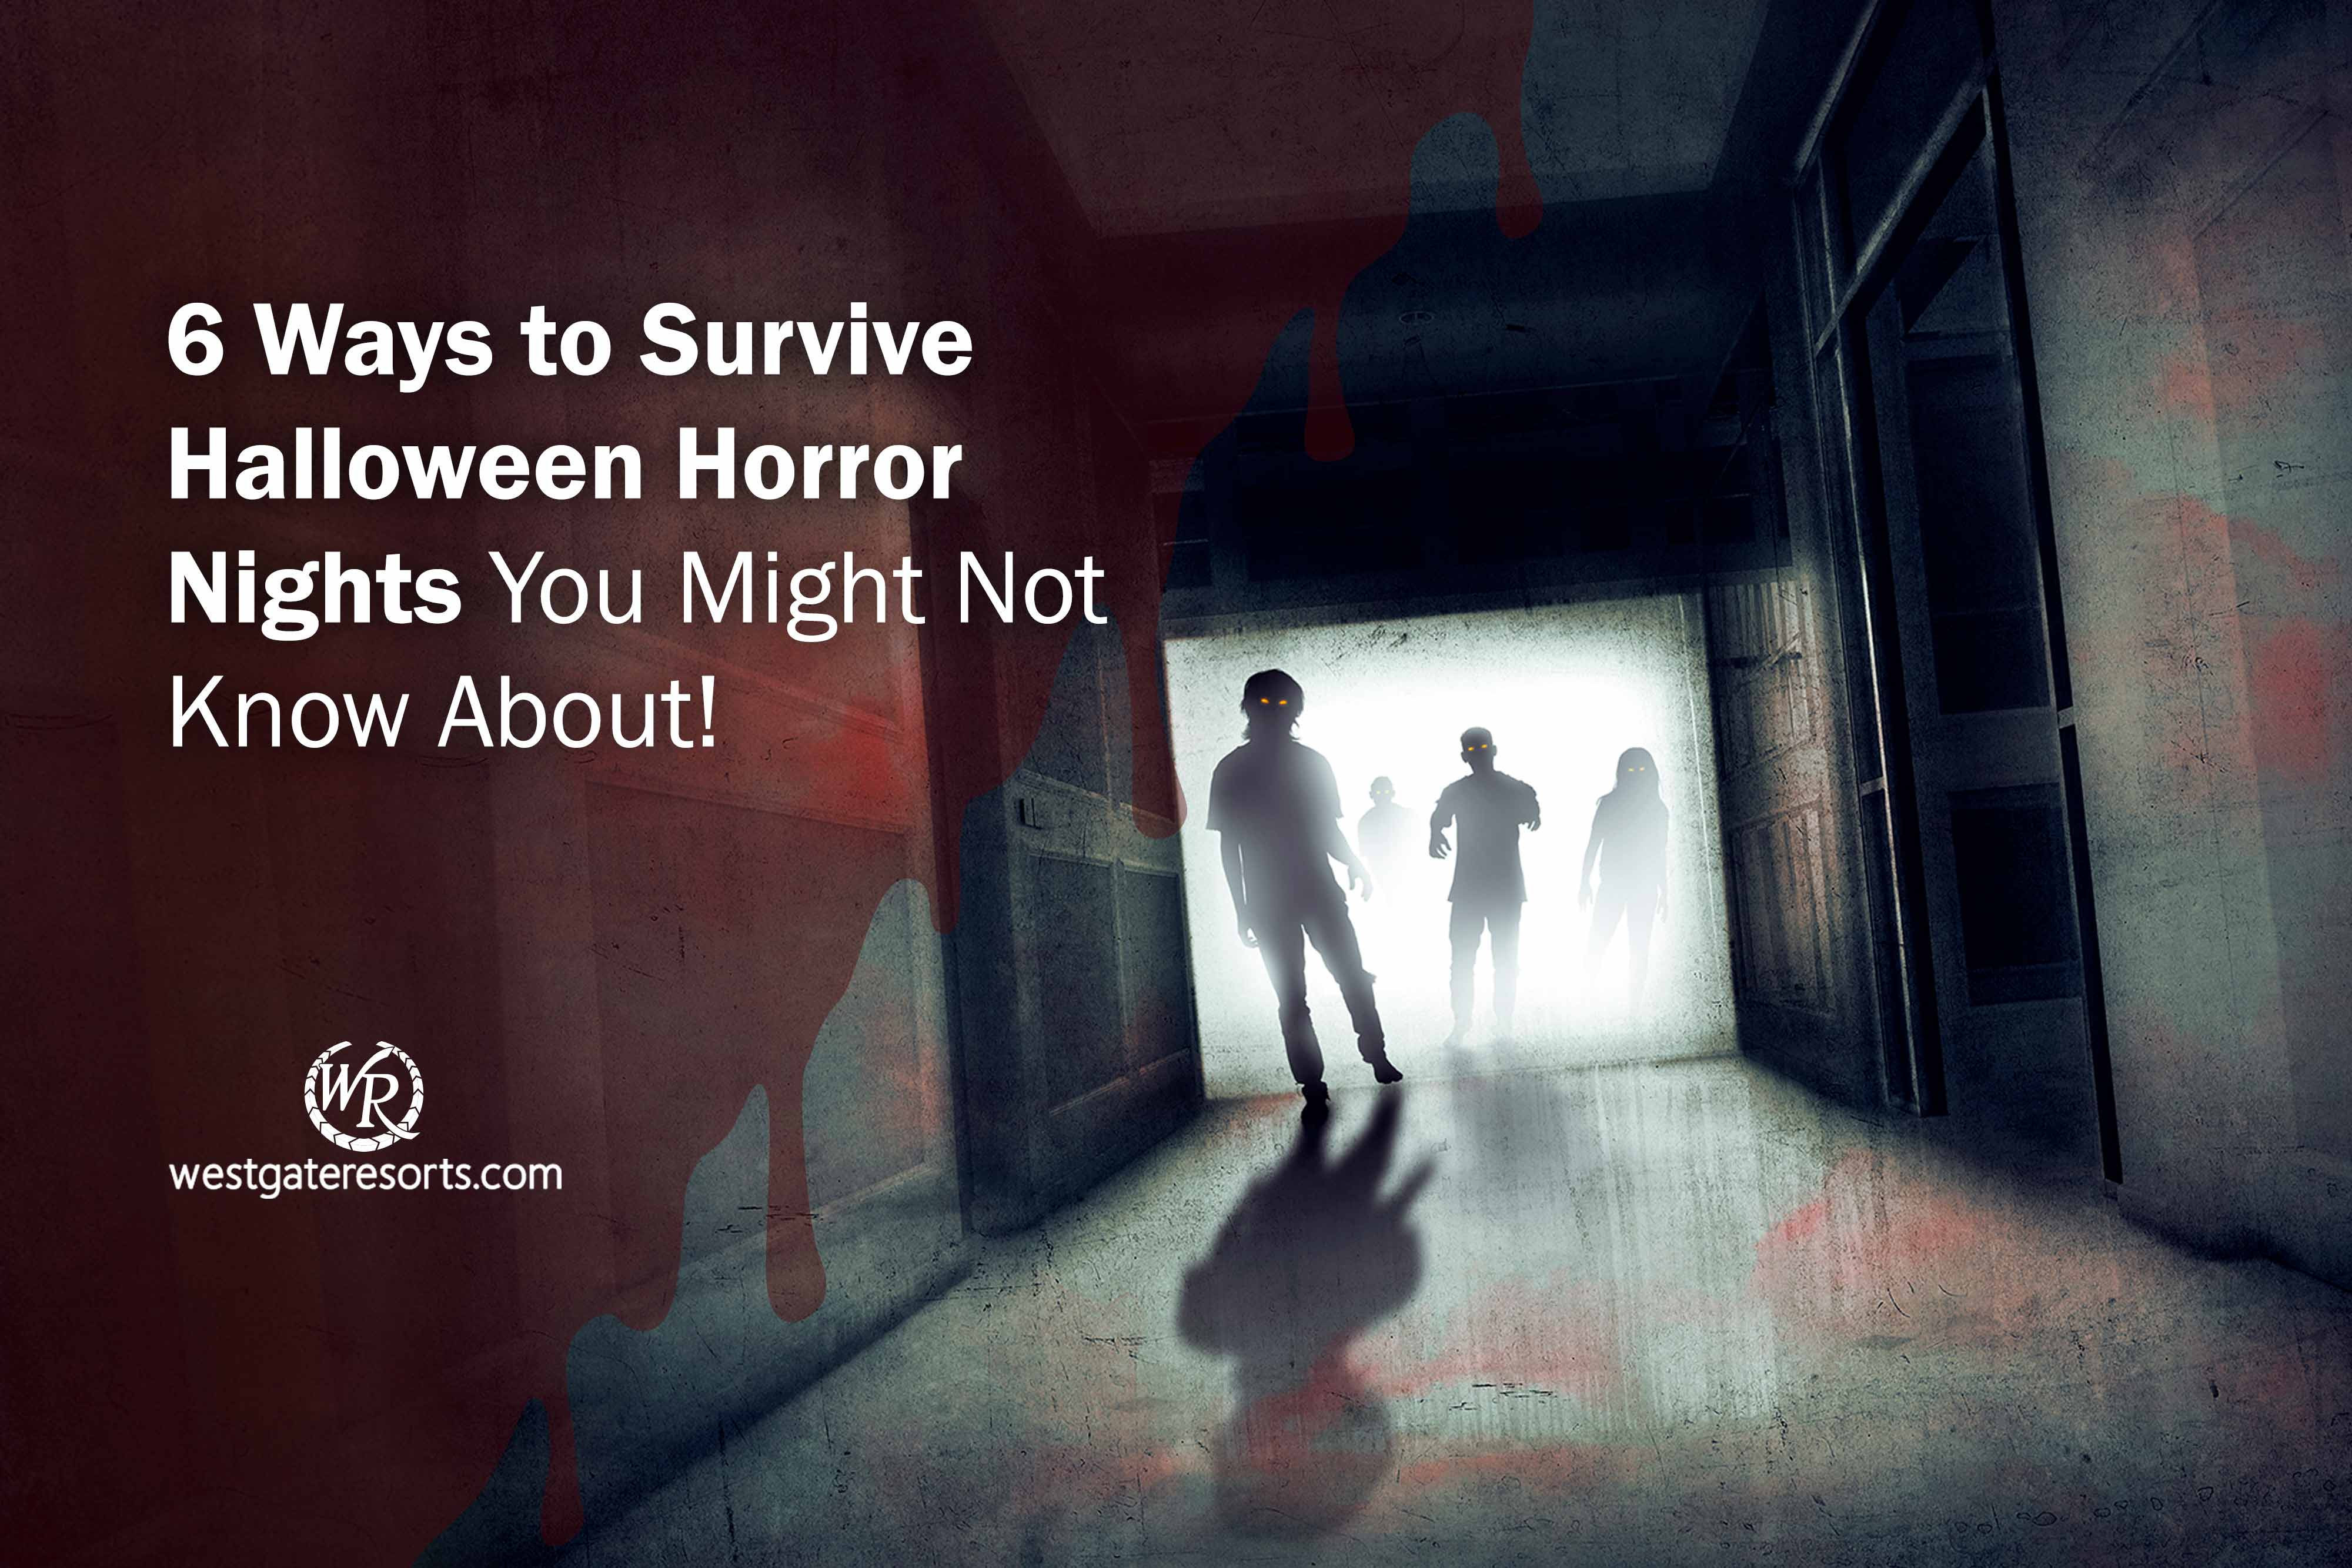 6 Ways to Survive Halloween Horror Nights You Might Not Know About! | HHN 2019